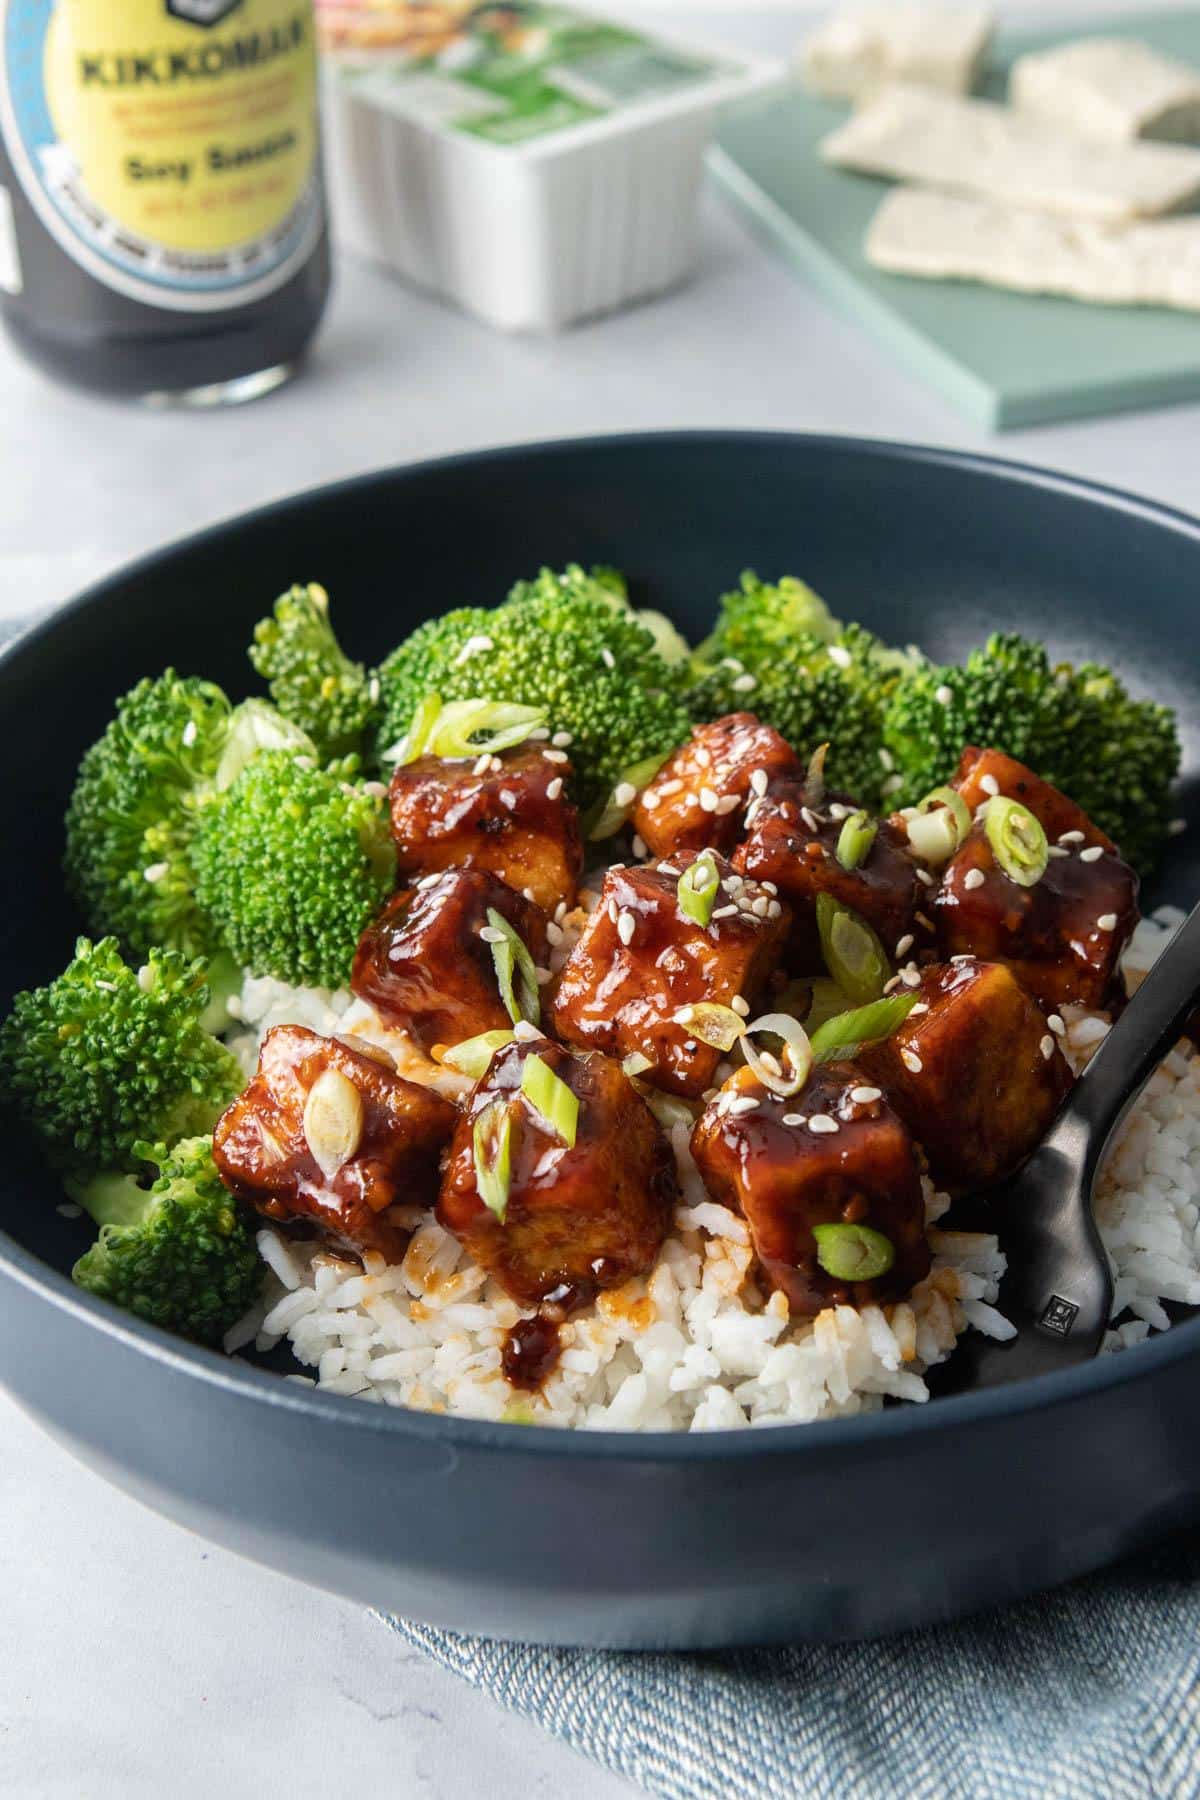 cubed tofu with thick soy sauce, broccoli over rice in blue bowl